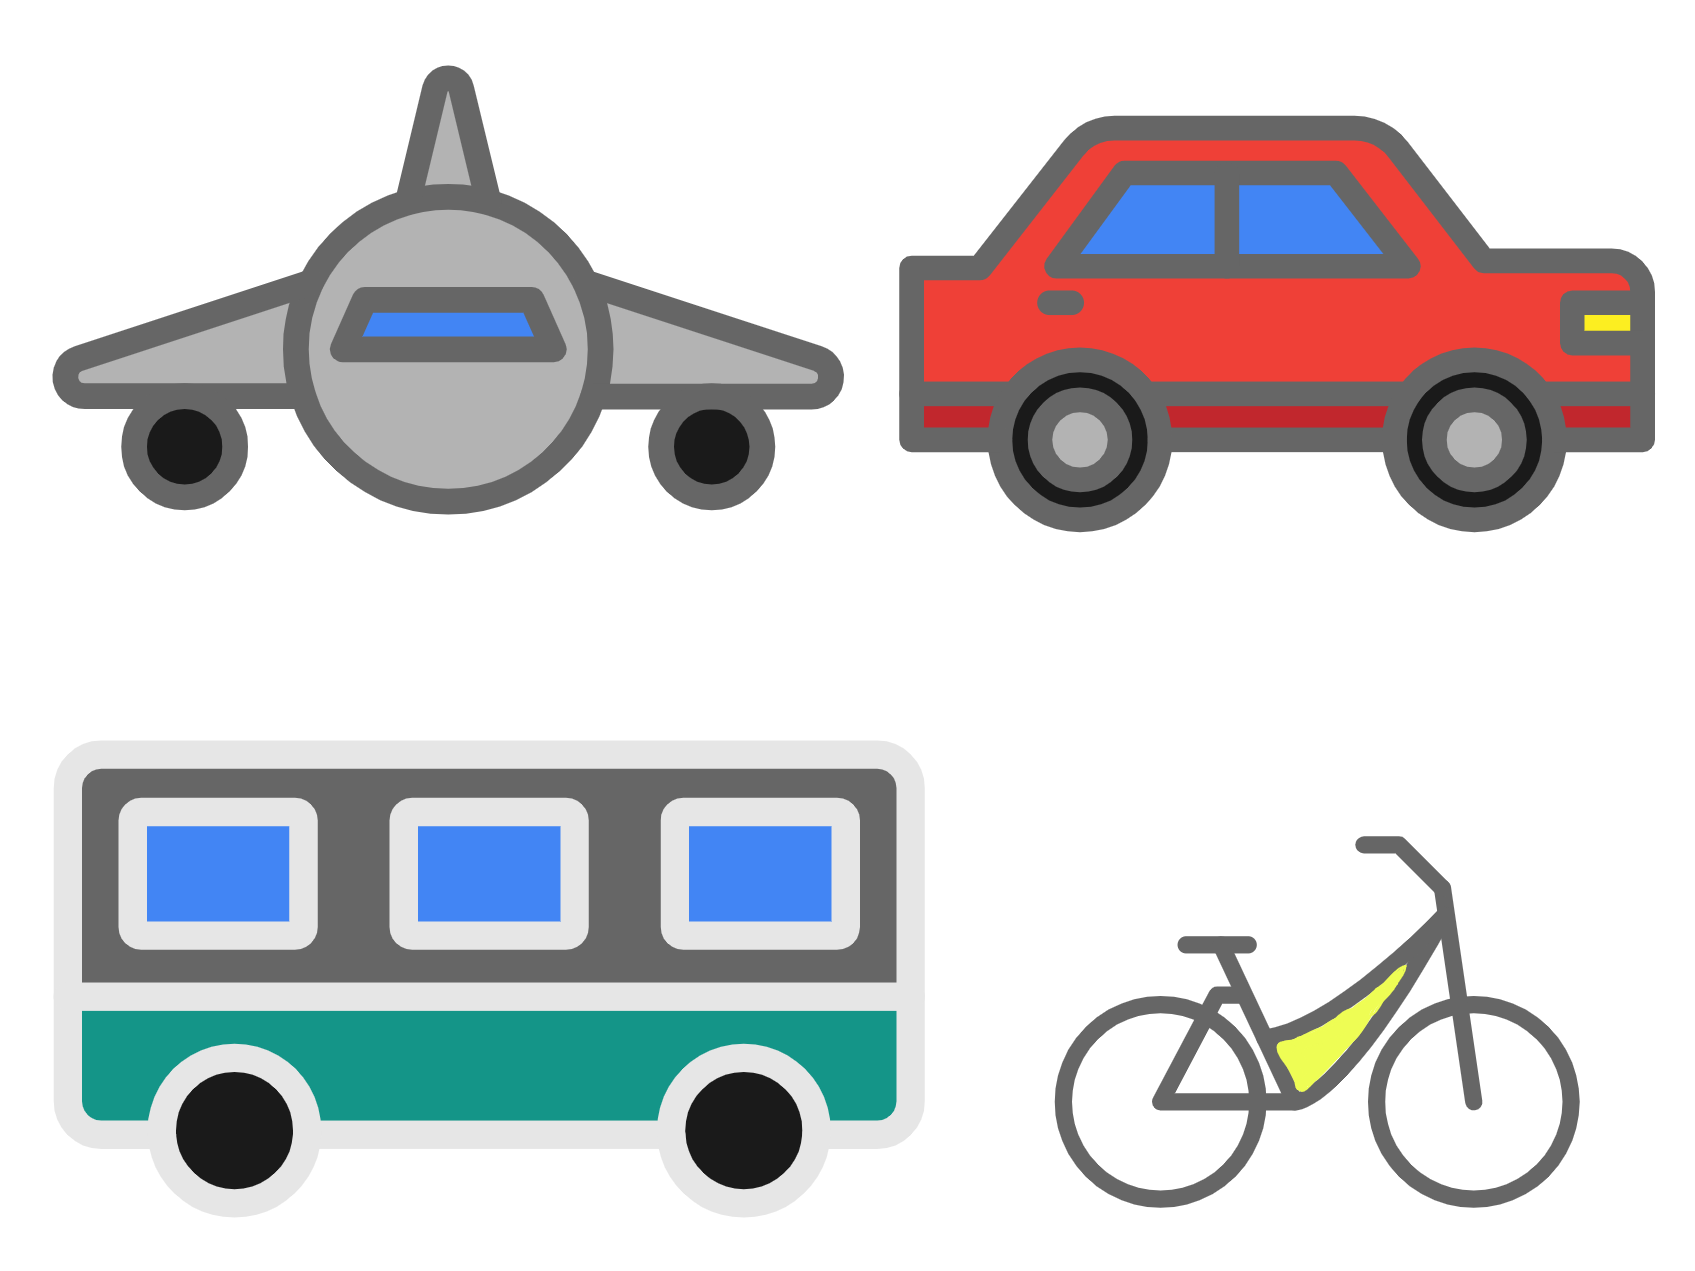 ../../_images/Vehicles.png